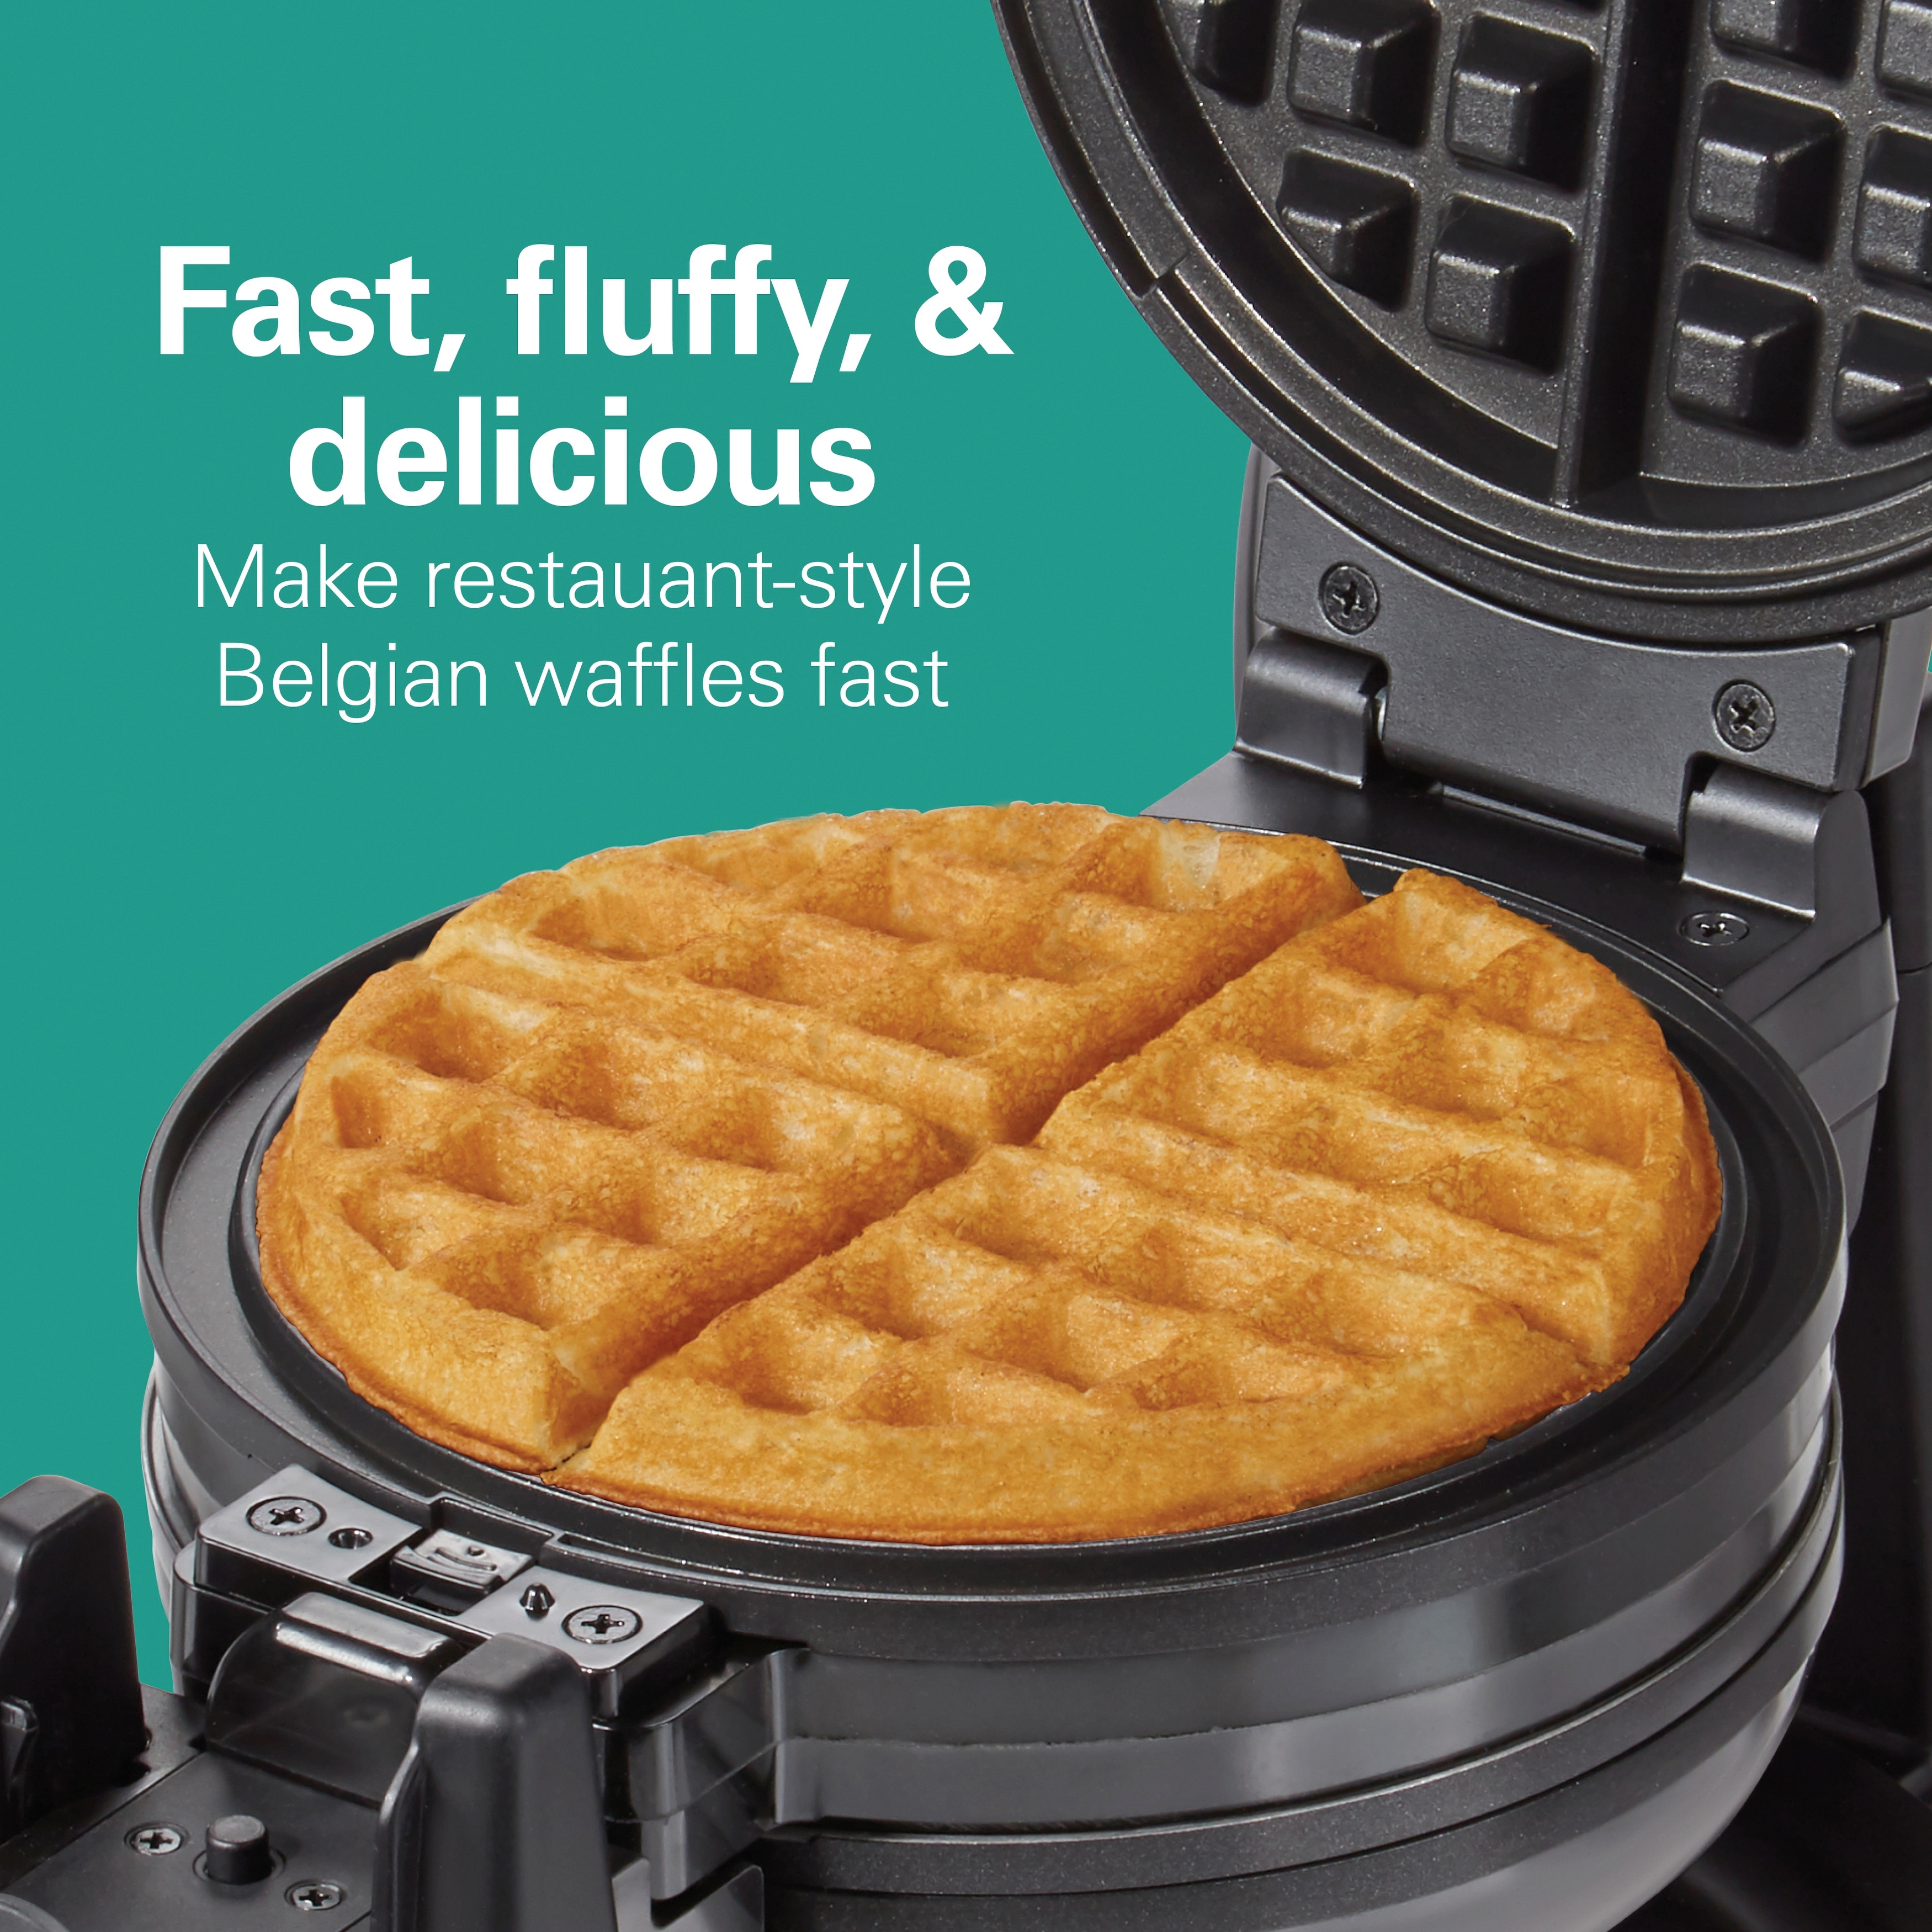 1300W thinkkitchen Double Waffle Maker Red Make 2 Belgian Waffles at Once Waffle Maker With Removable Plates